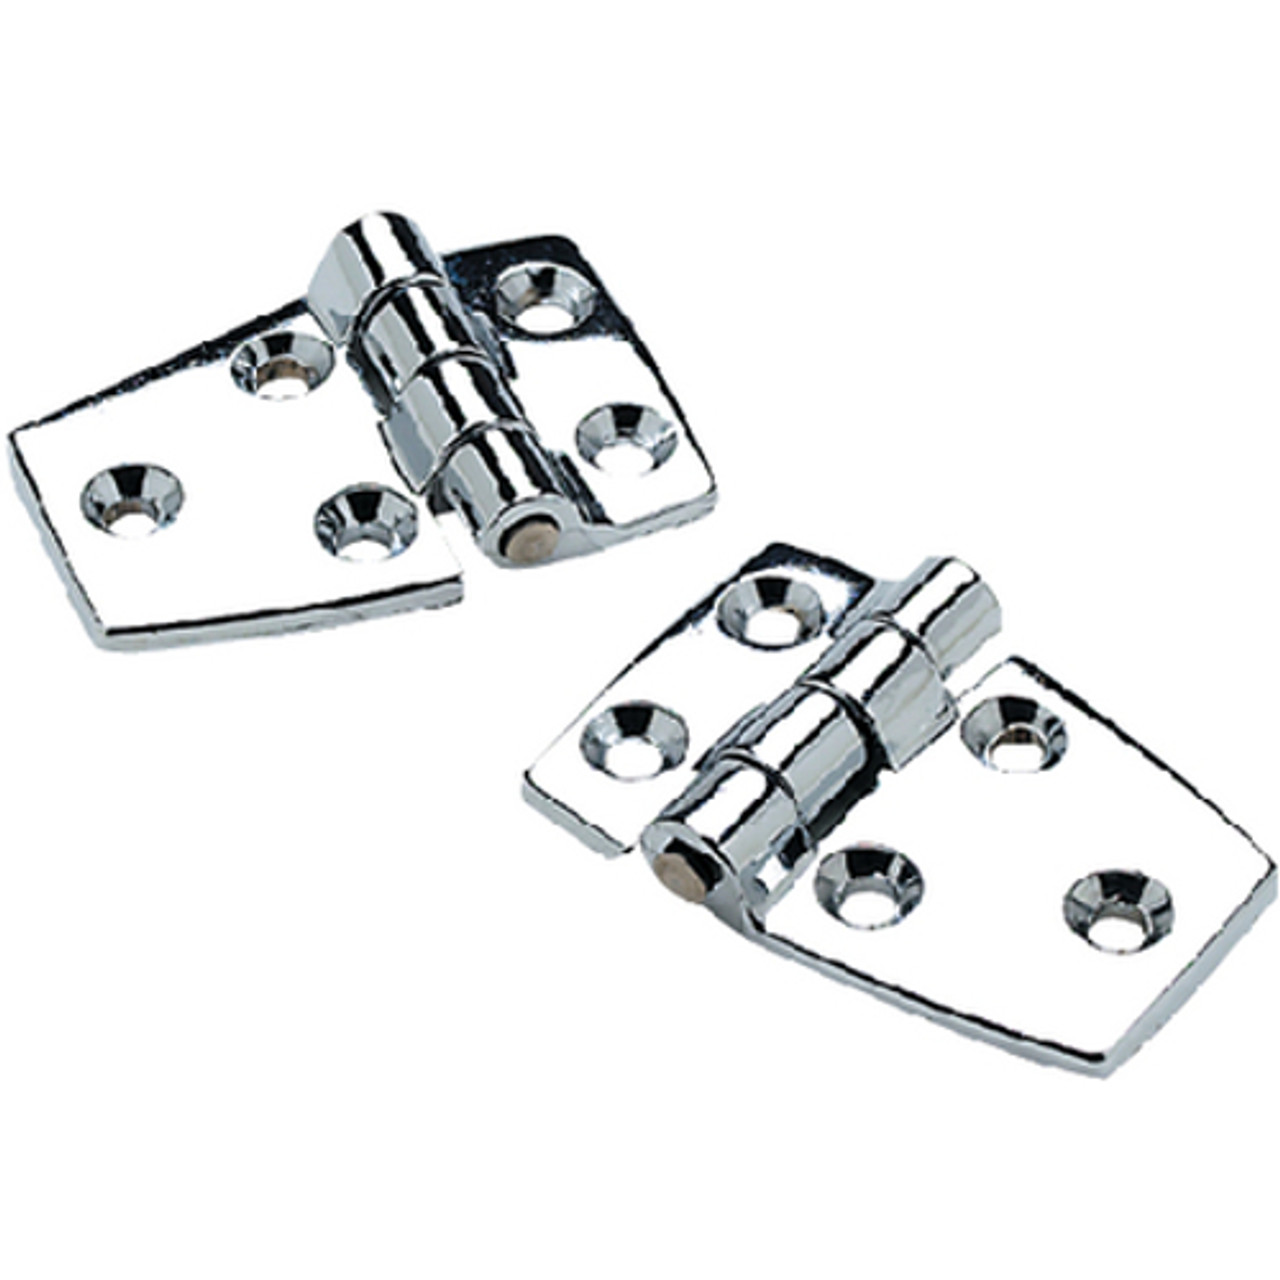 2 Pack of 2-1/4 x 1-1/2 Inch Chrome Plated Zinc Short Side Hinges for Boats